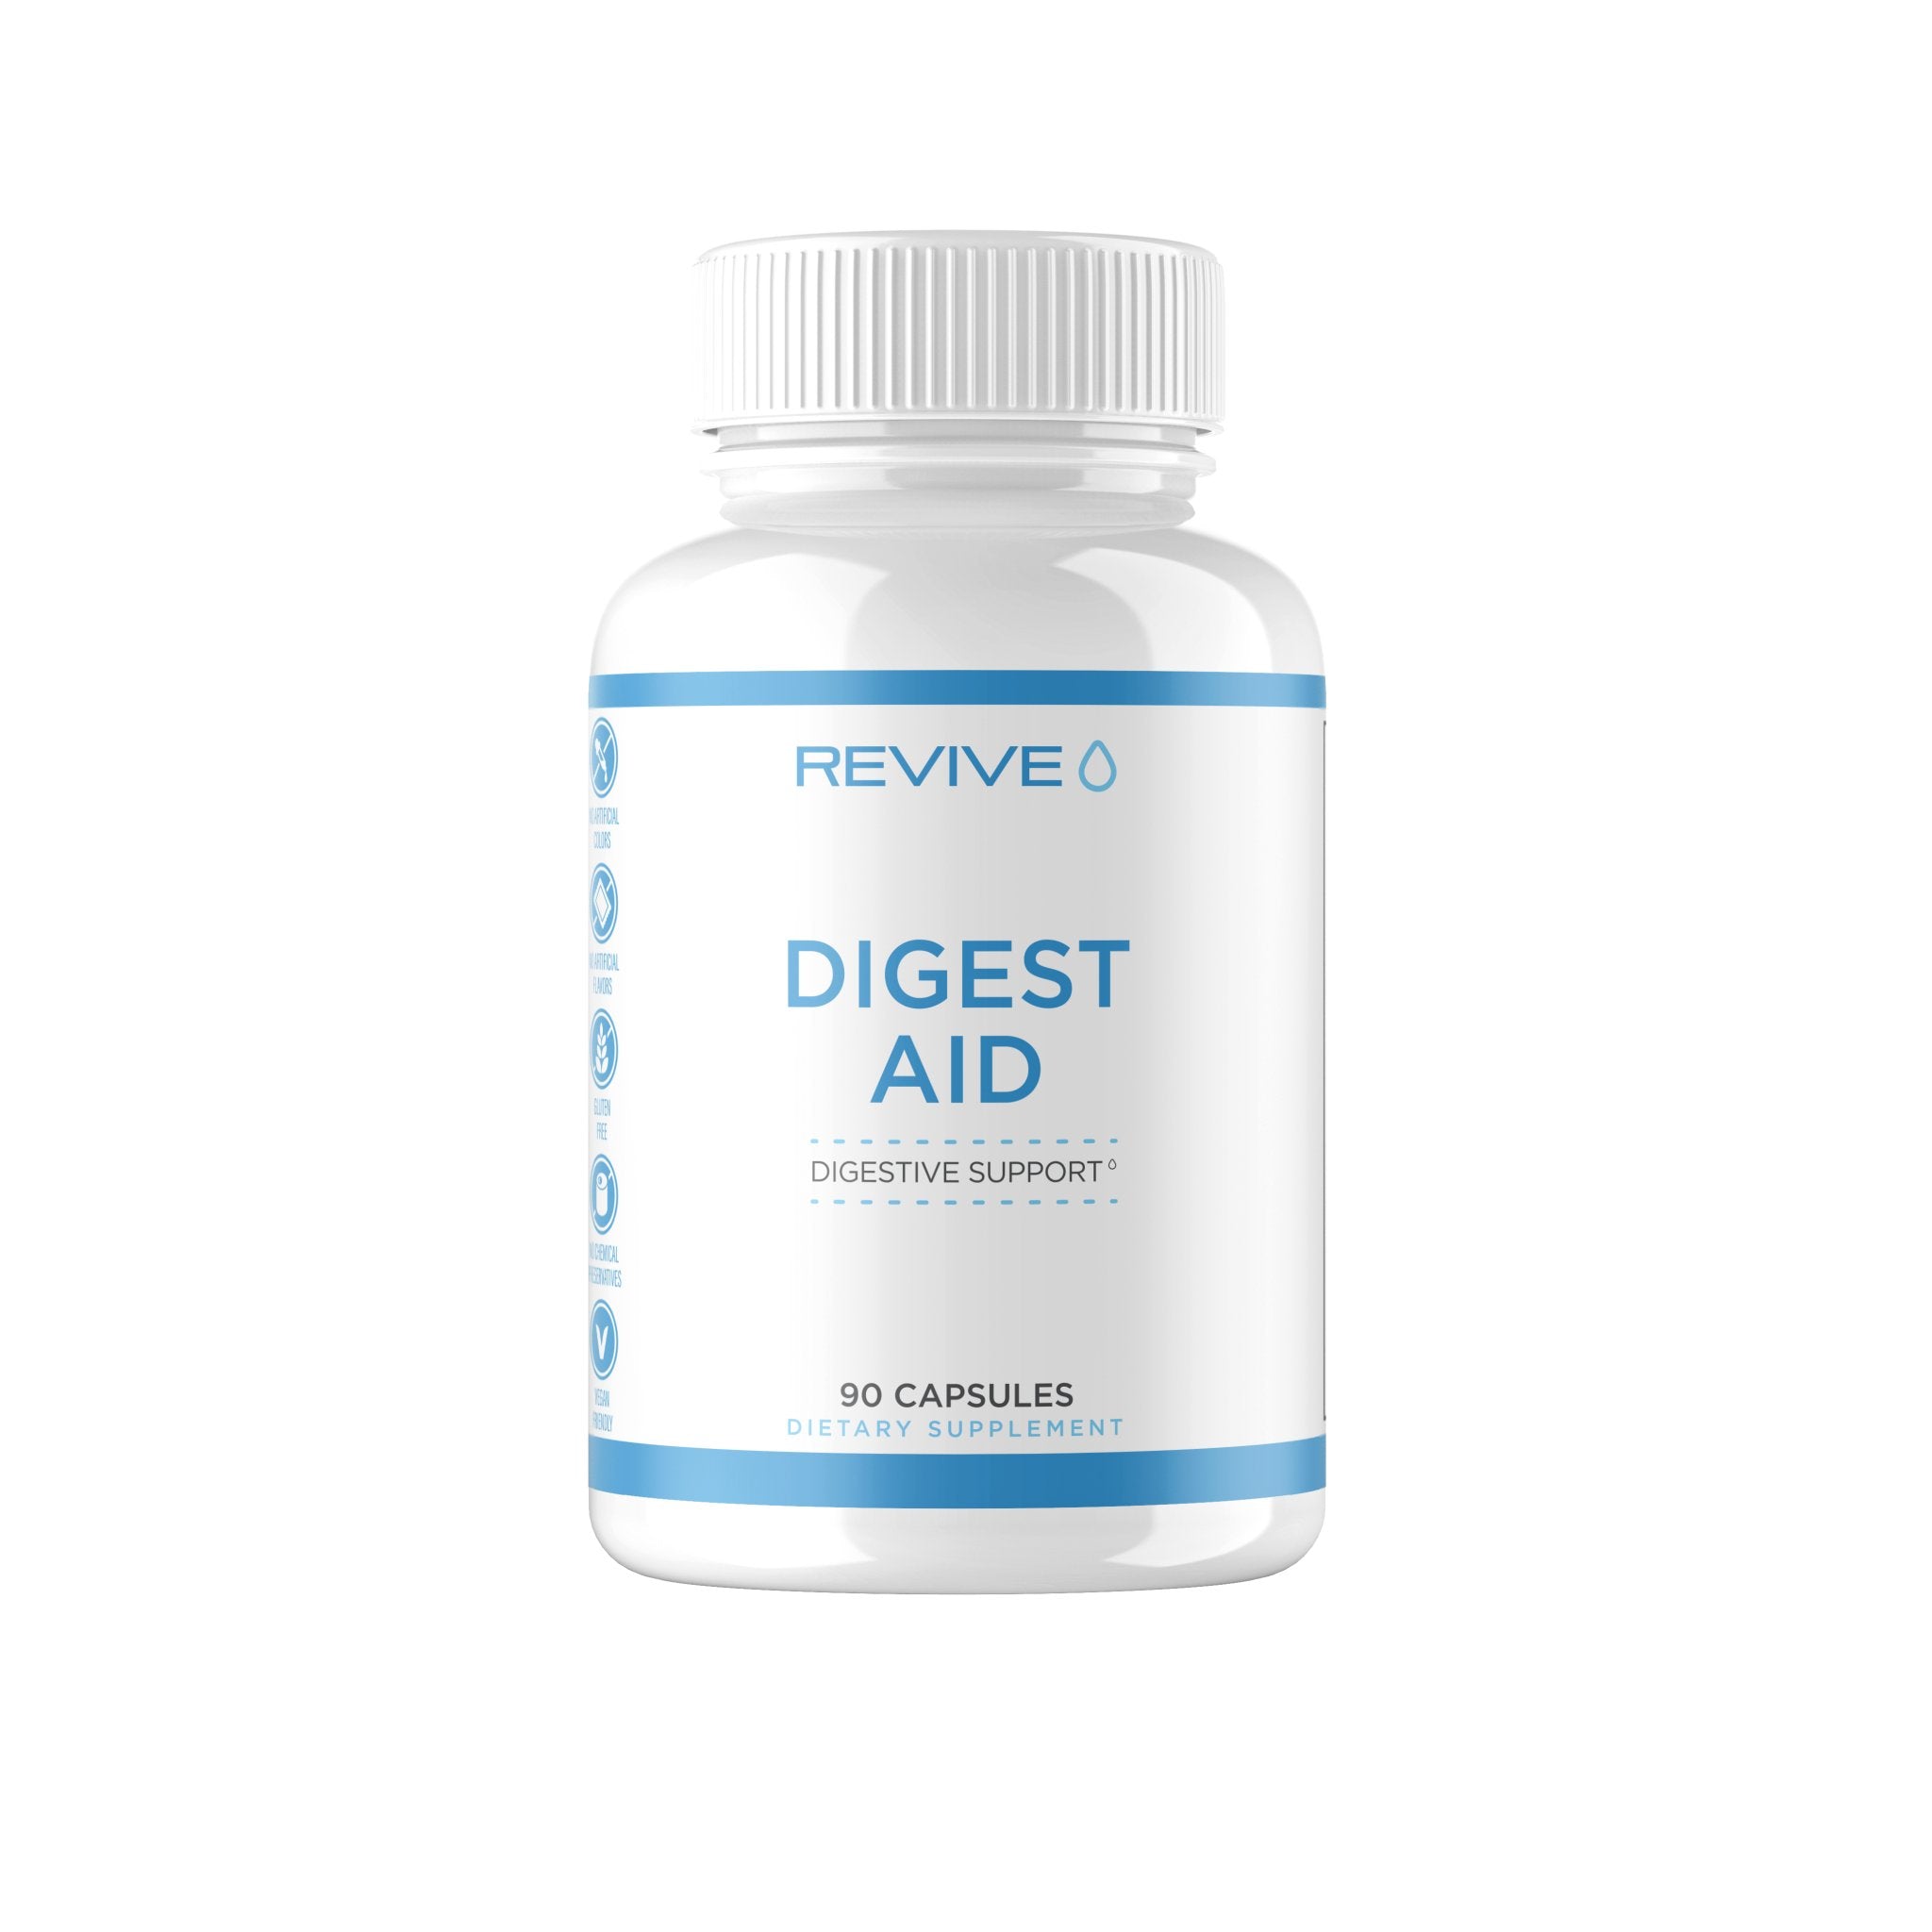 REVIVE MDDigest AidDigestive SupportRED SUPPS